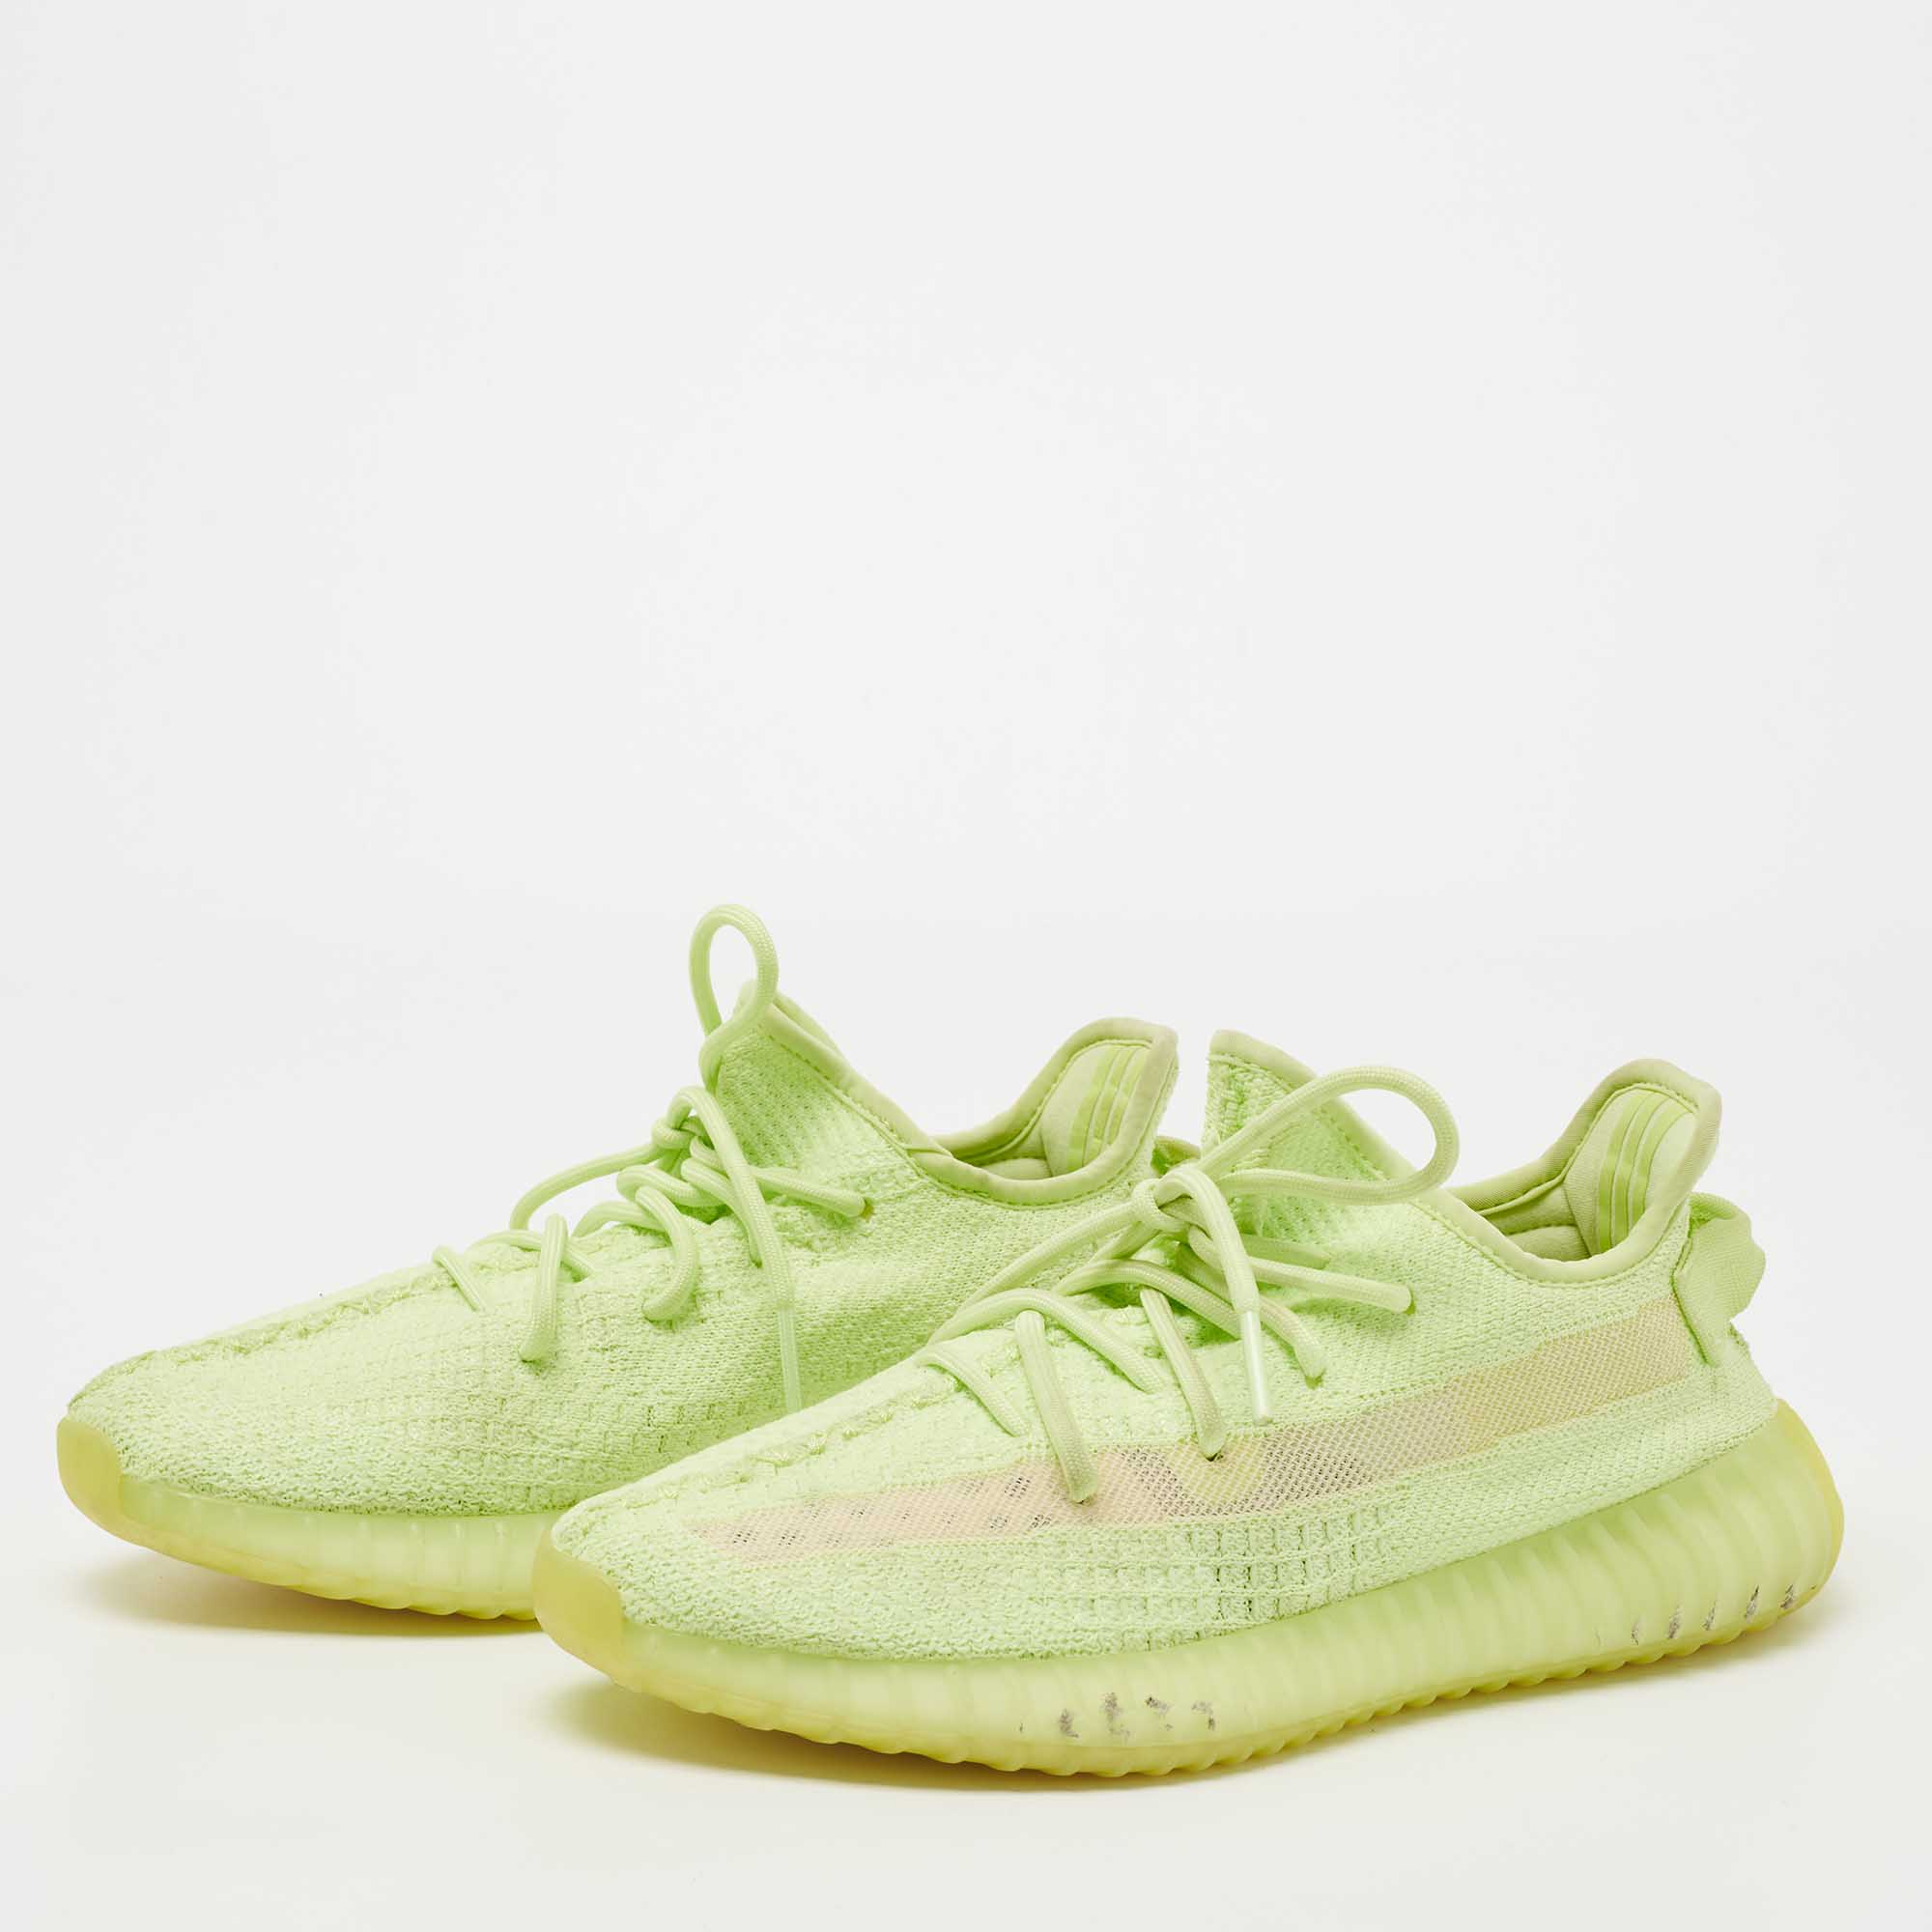 

Yeezy x Adidas Neon Green Knit Fabric Boost 350 V2 Glow Sneakers Size  1/3